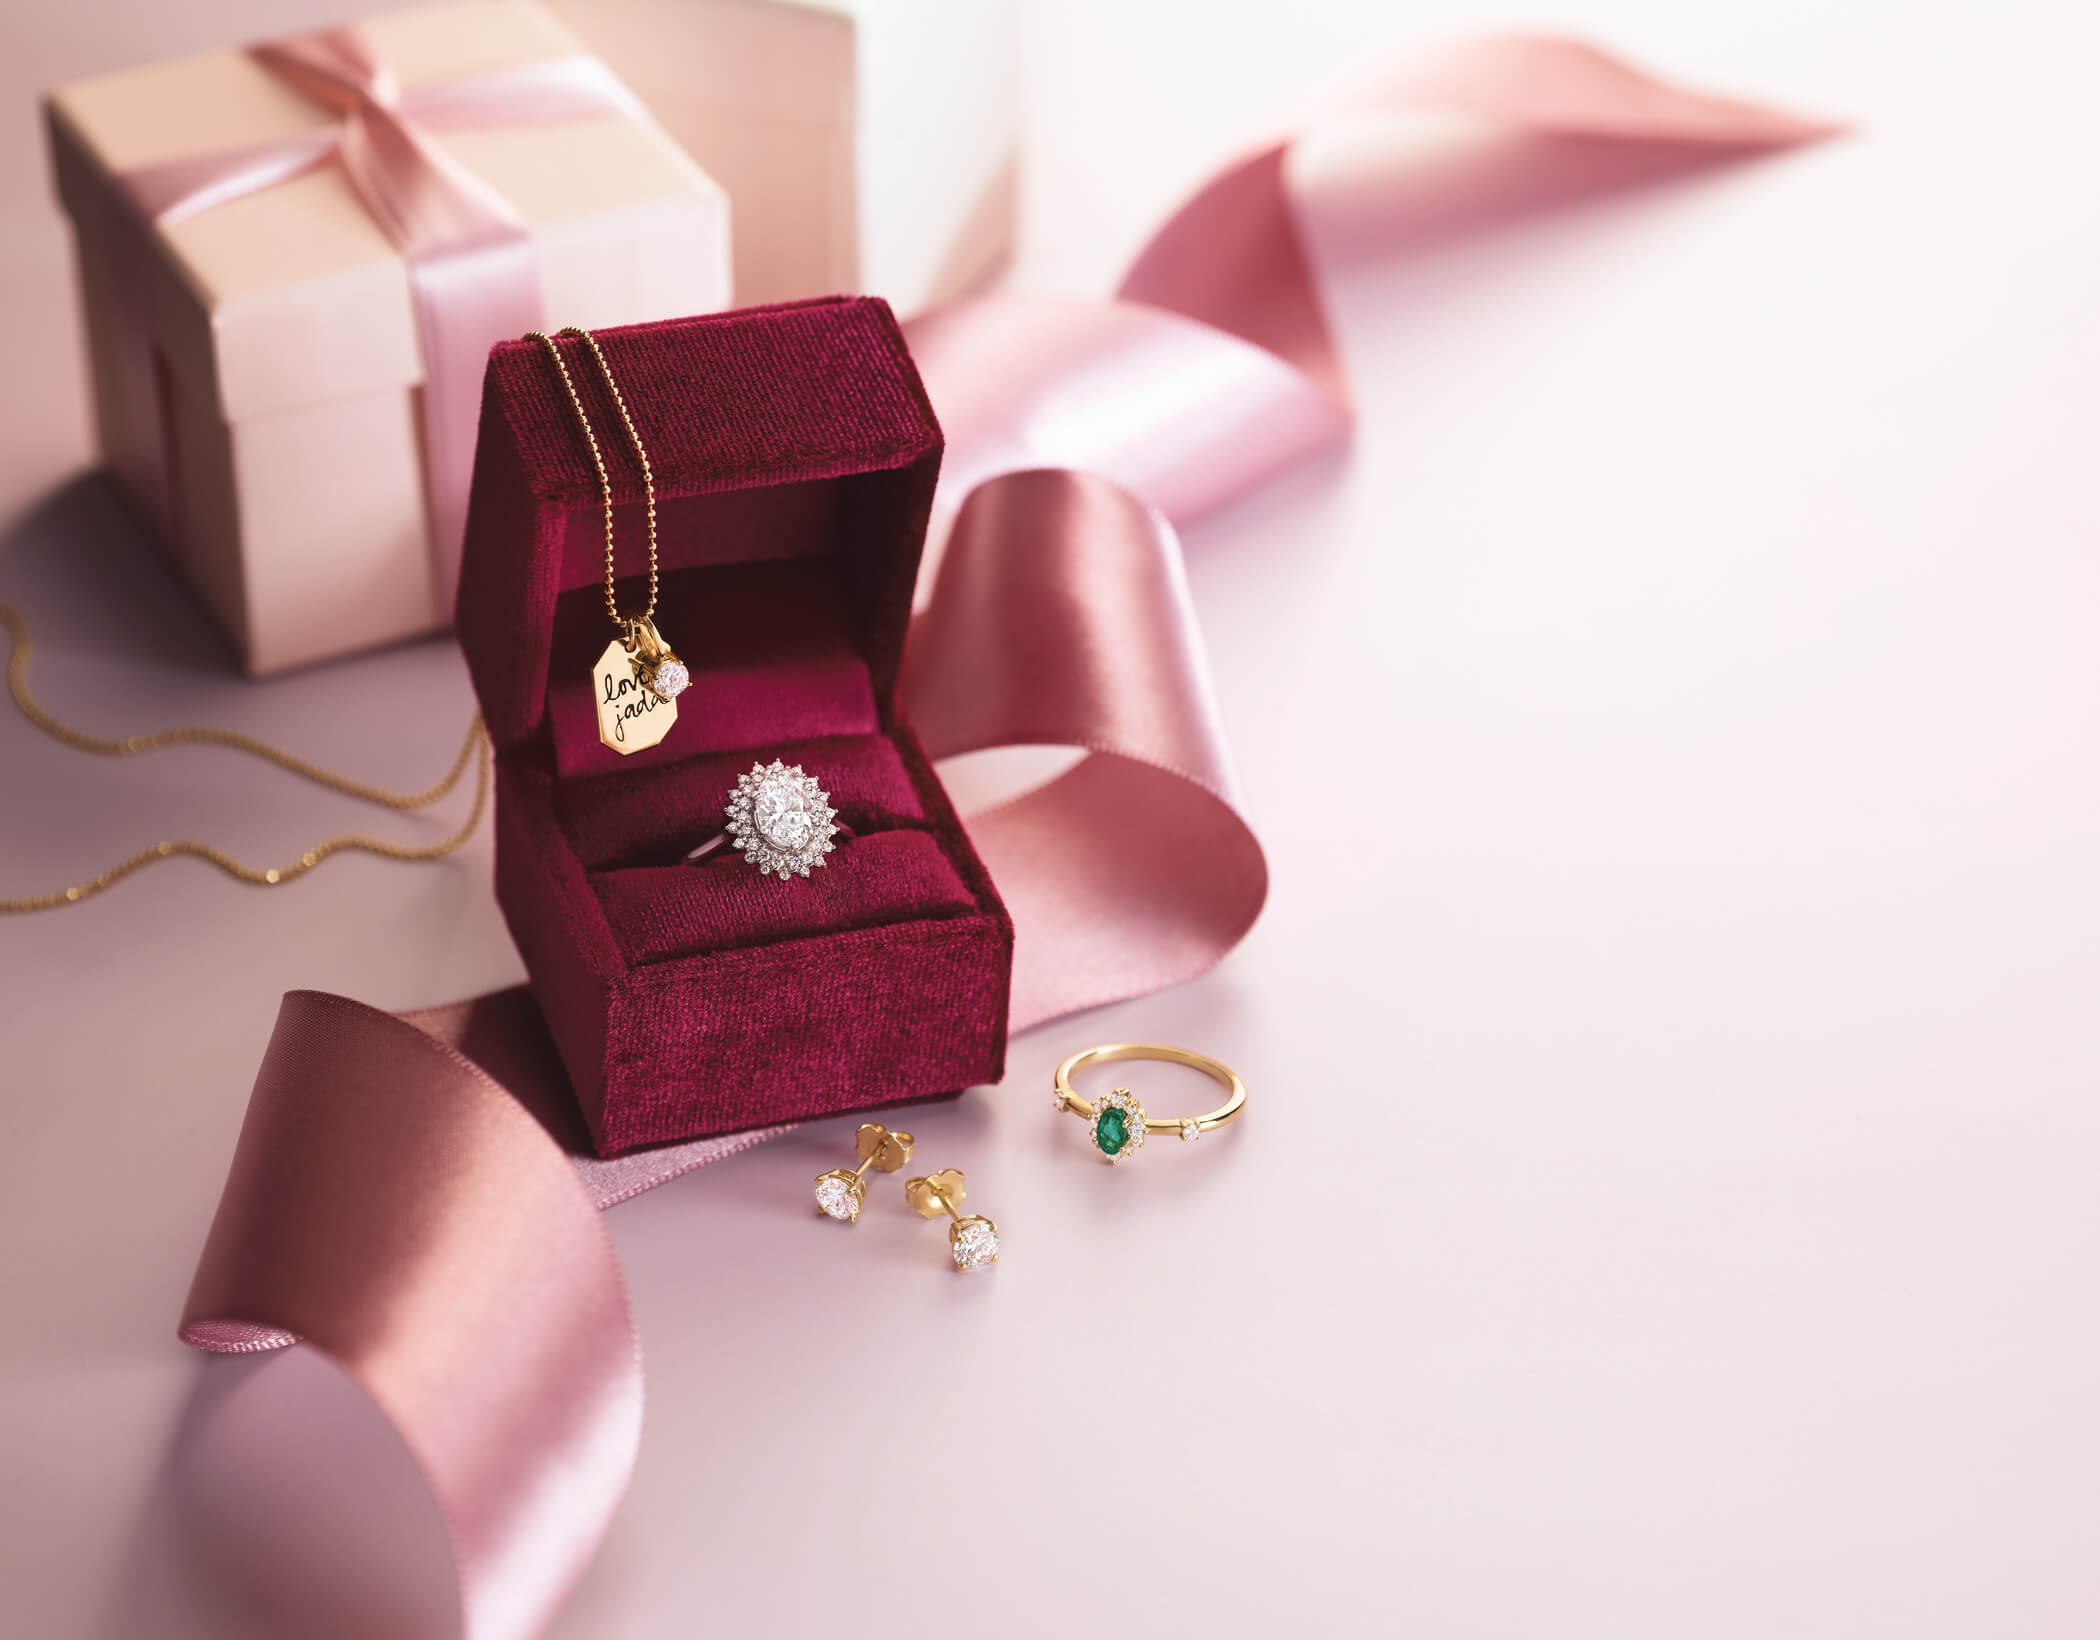 Jewellery Gifts: Stories whispered in gemstones.